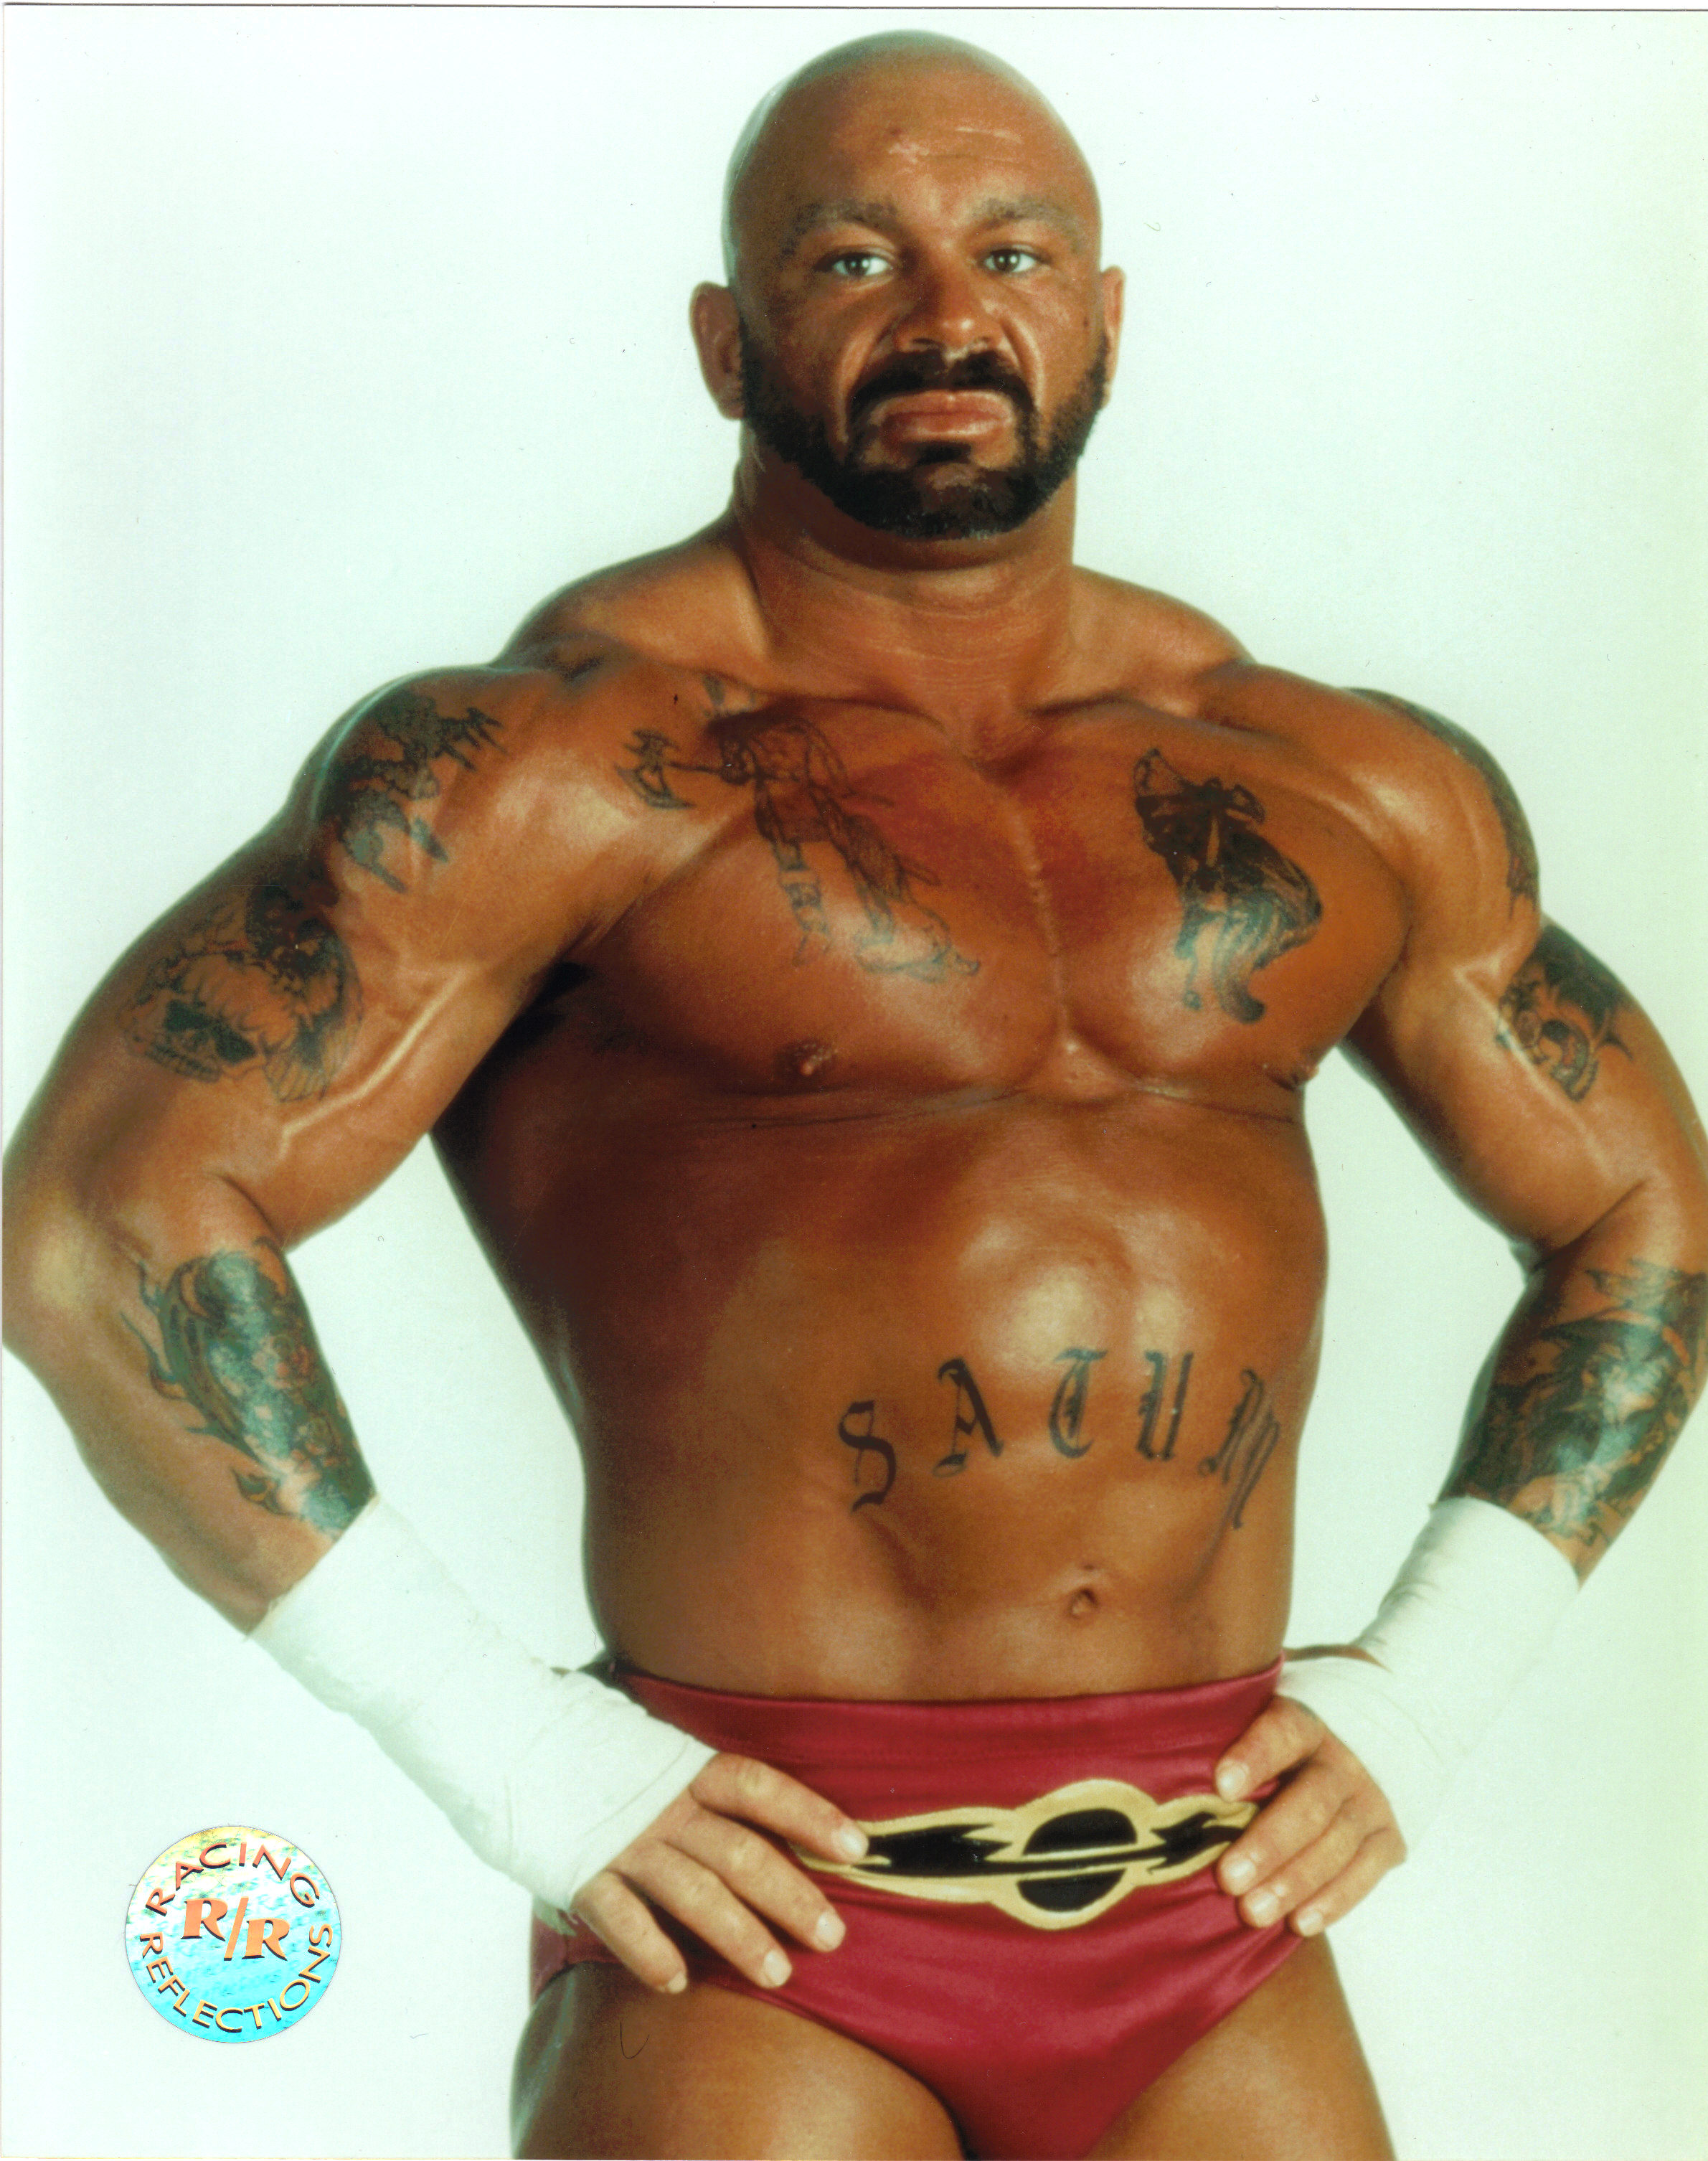 Recent Perry Saturn interview